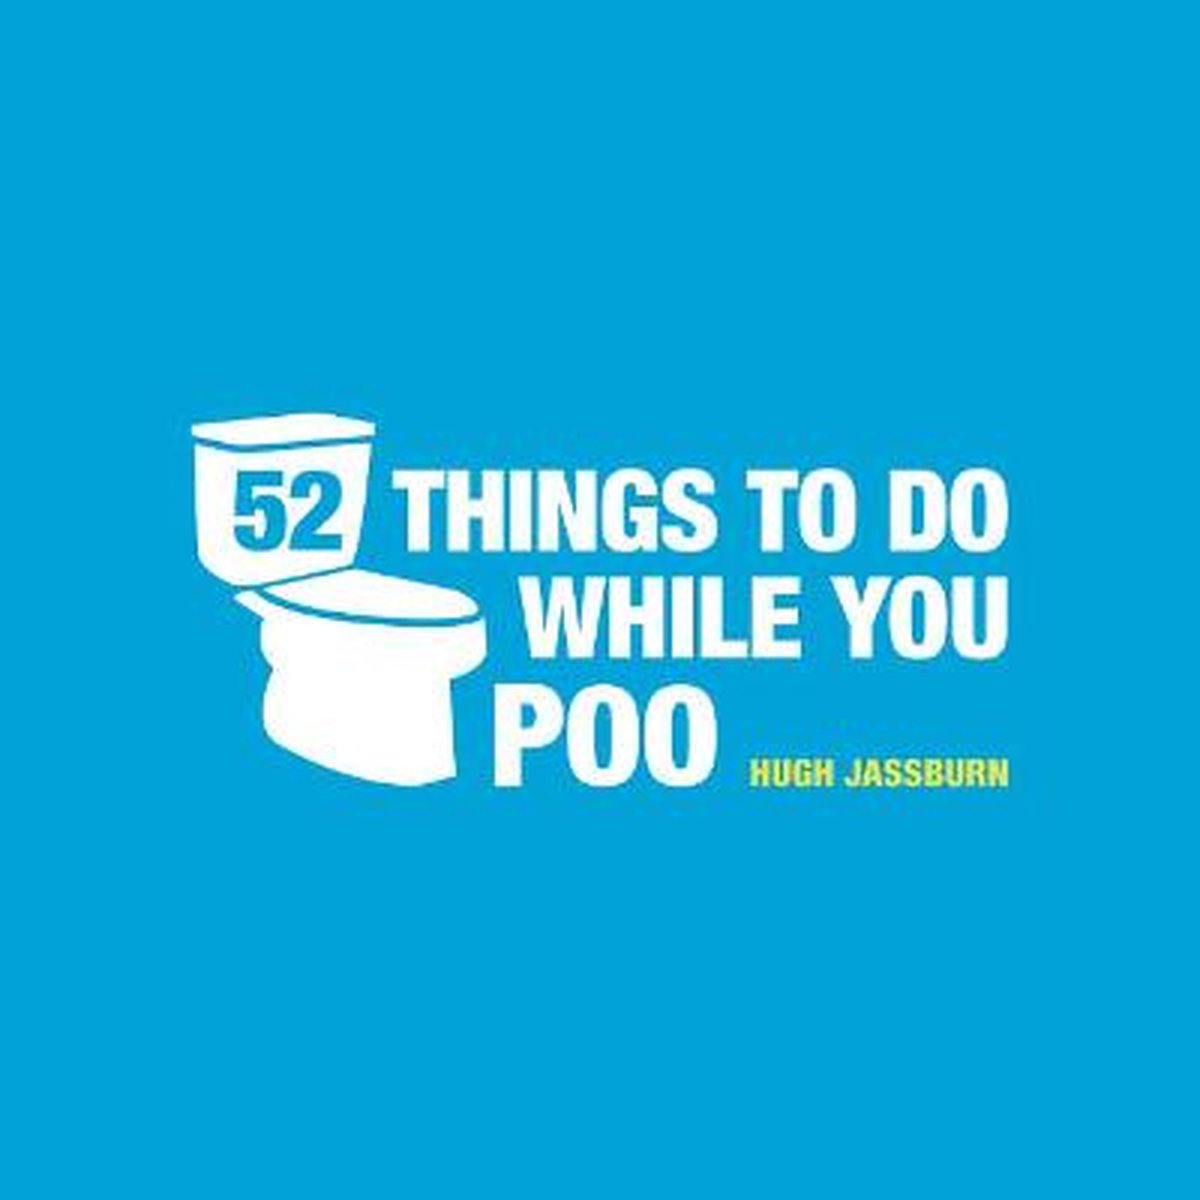 Fifty Two Things To Do While You Poo - Hugh Jassburn